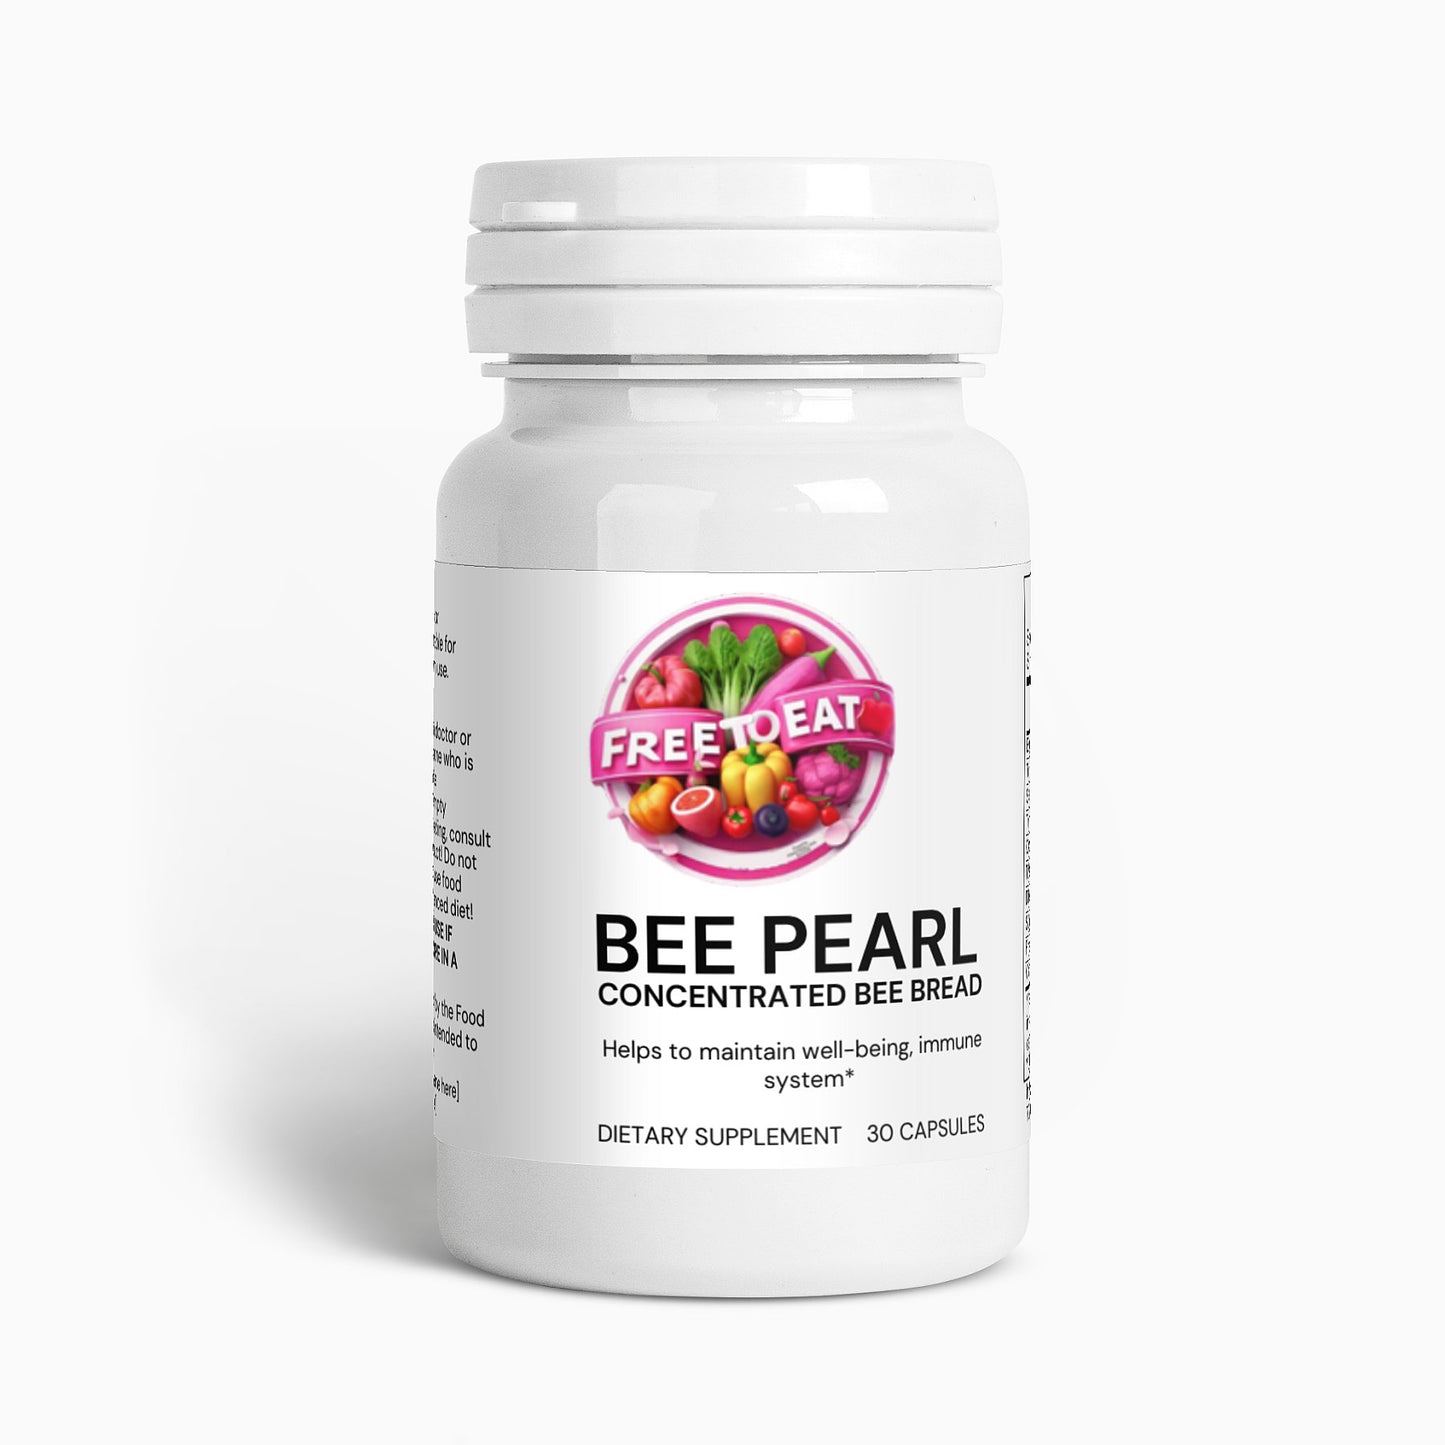 Free To Eat: Bee Pearl